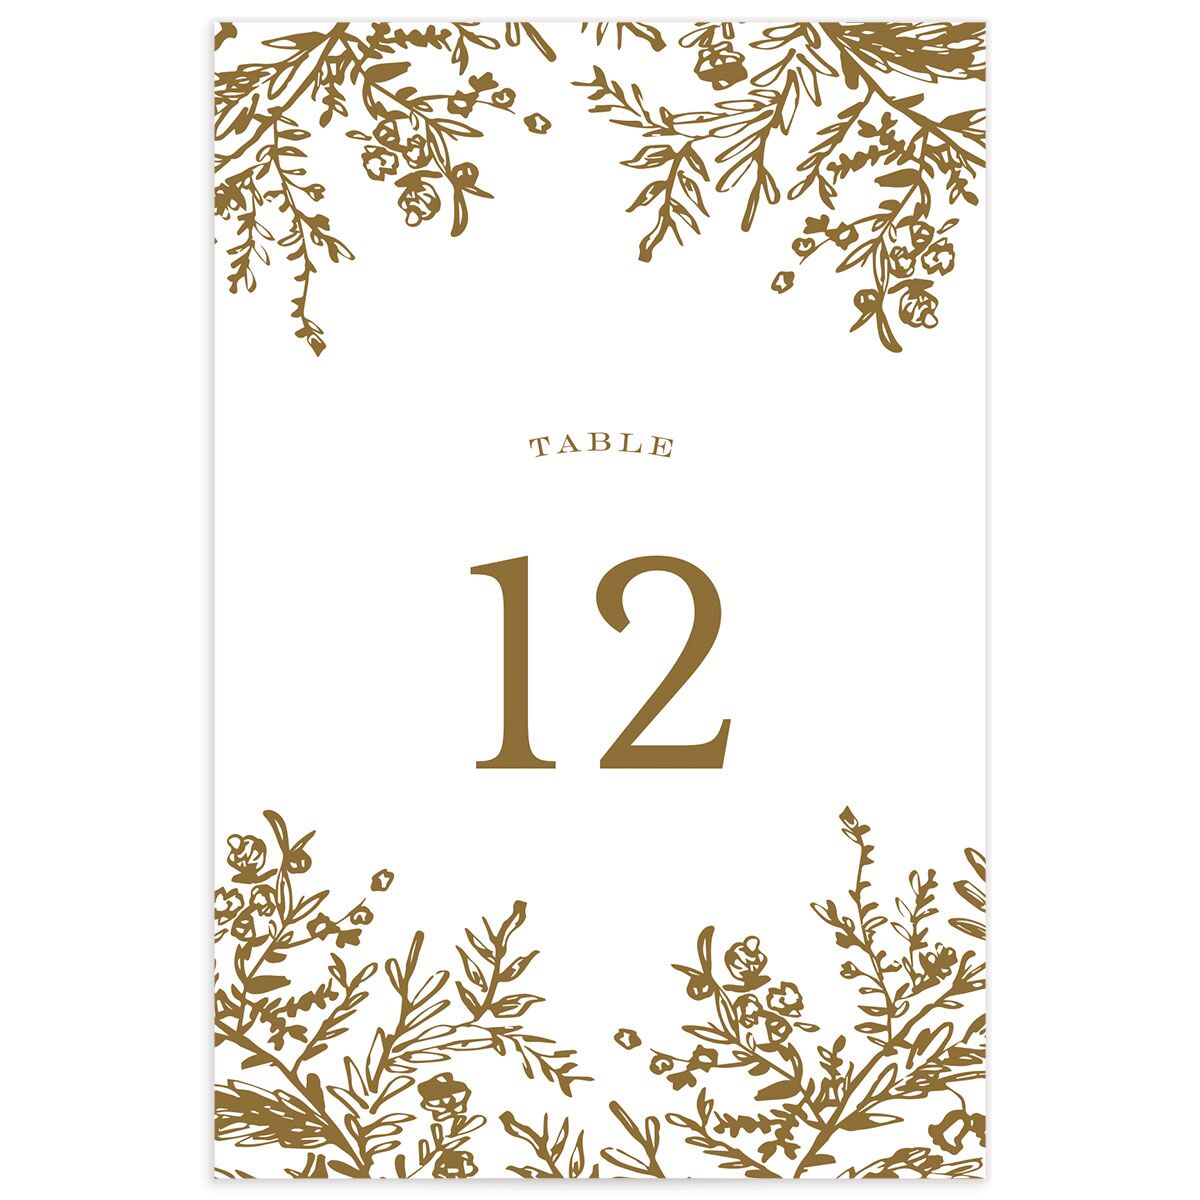 Graceful Laurel Table Numbers back in Gold